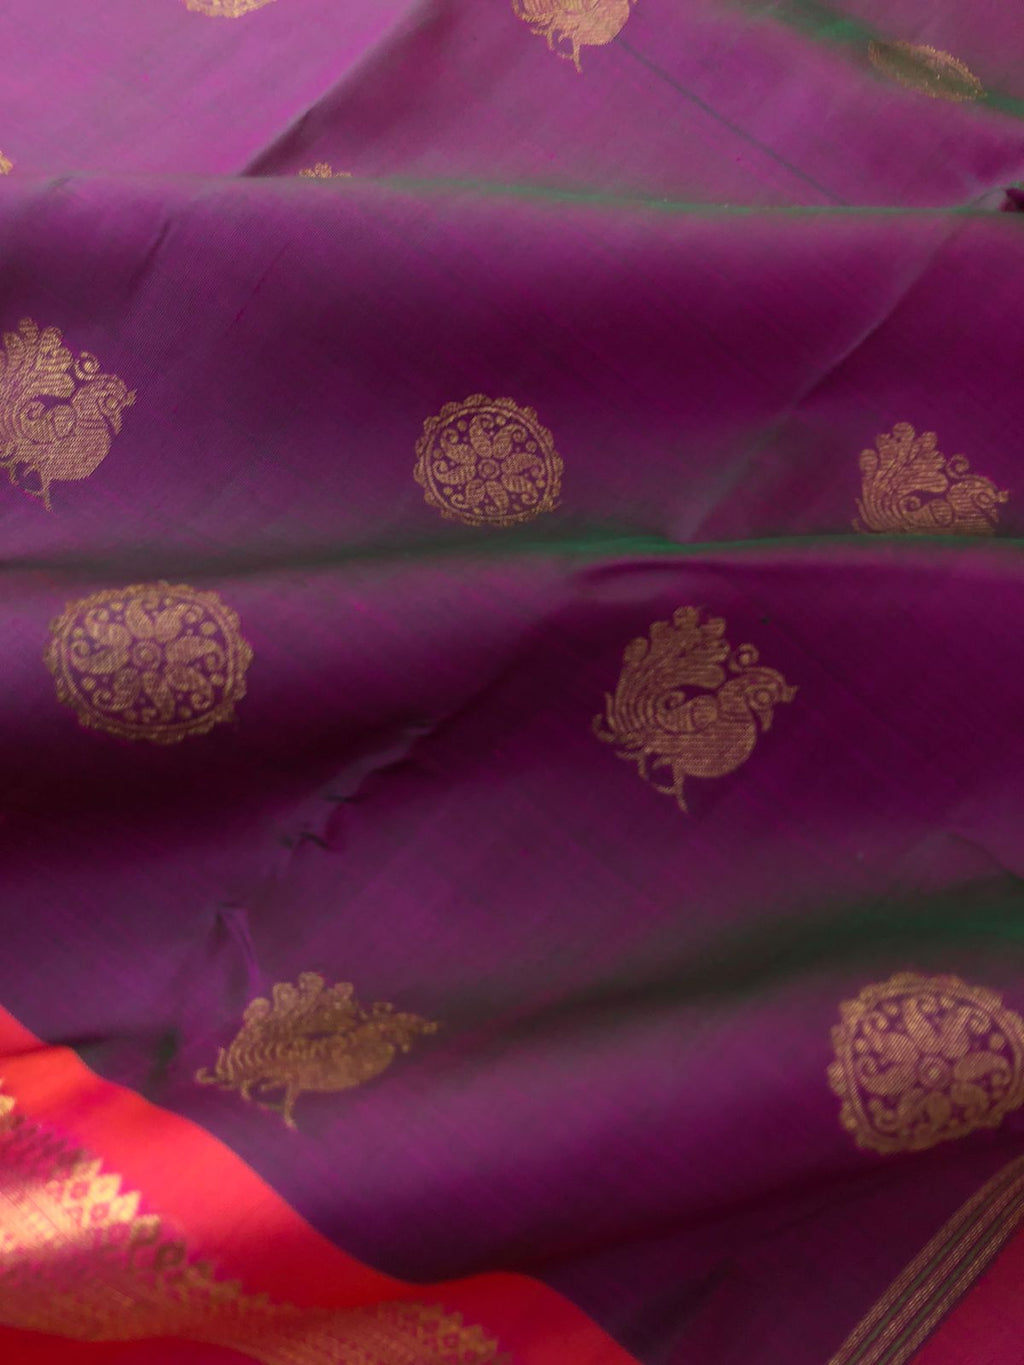 Leela - Legacy Of Kanchivarams - a perfect dual tone effects of purple short green with short pink broad woven borders